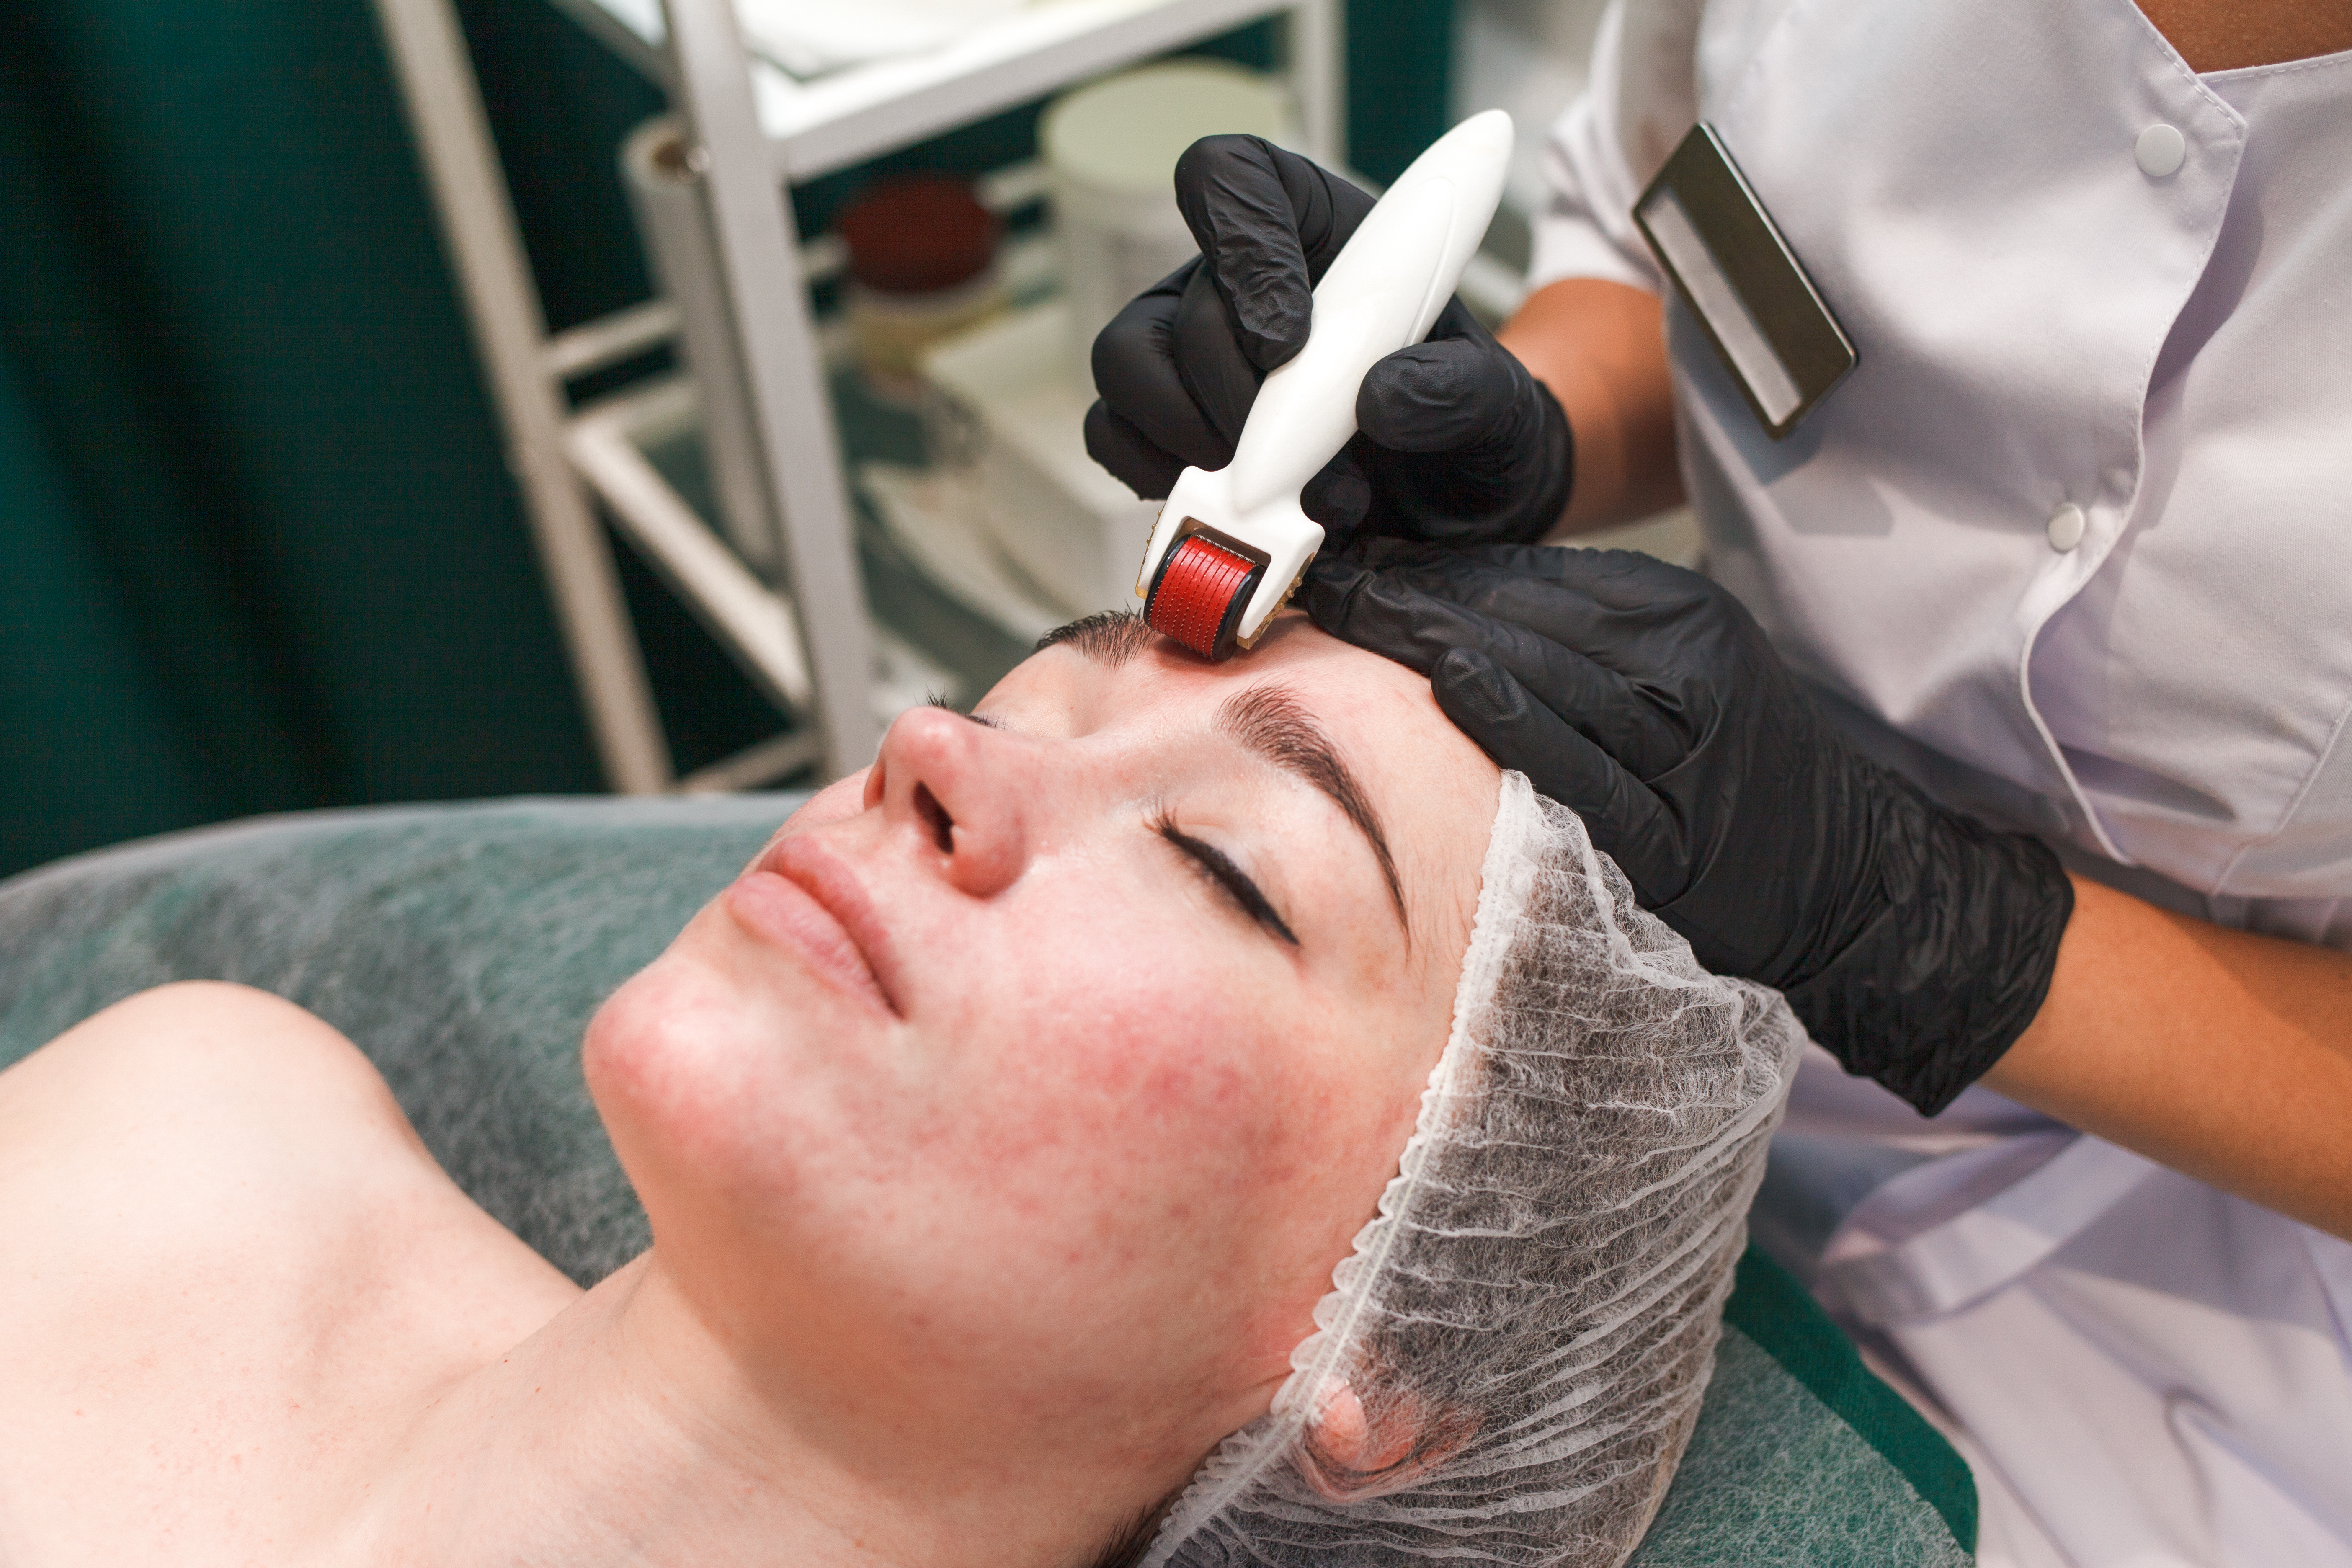 A dermatologist dermarolling the areas around the eyebrows | Source: Getty Images